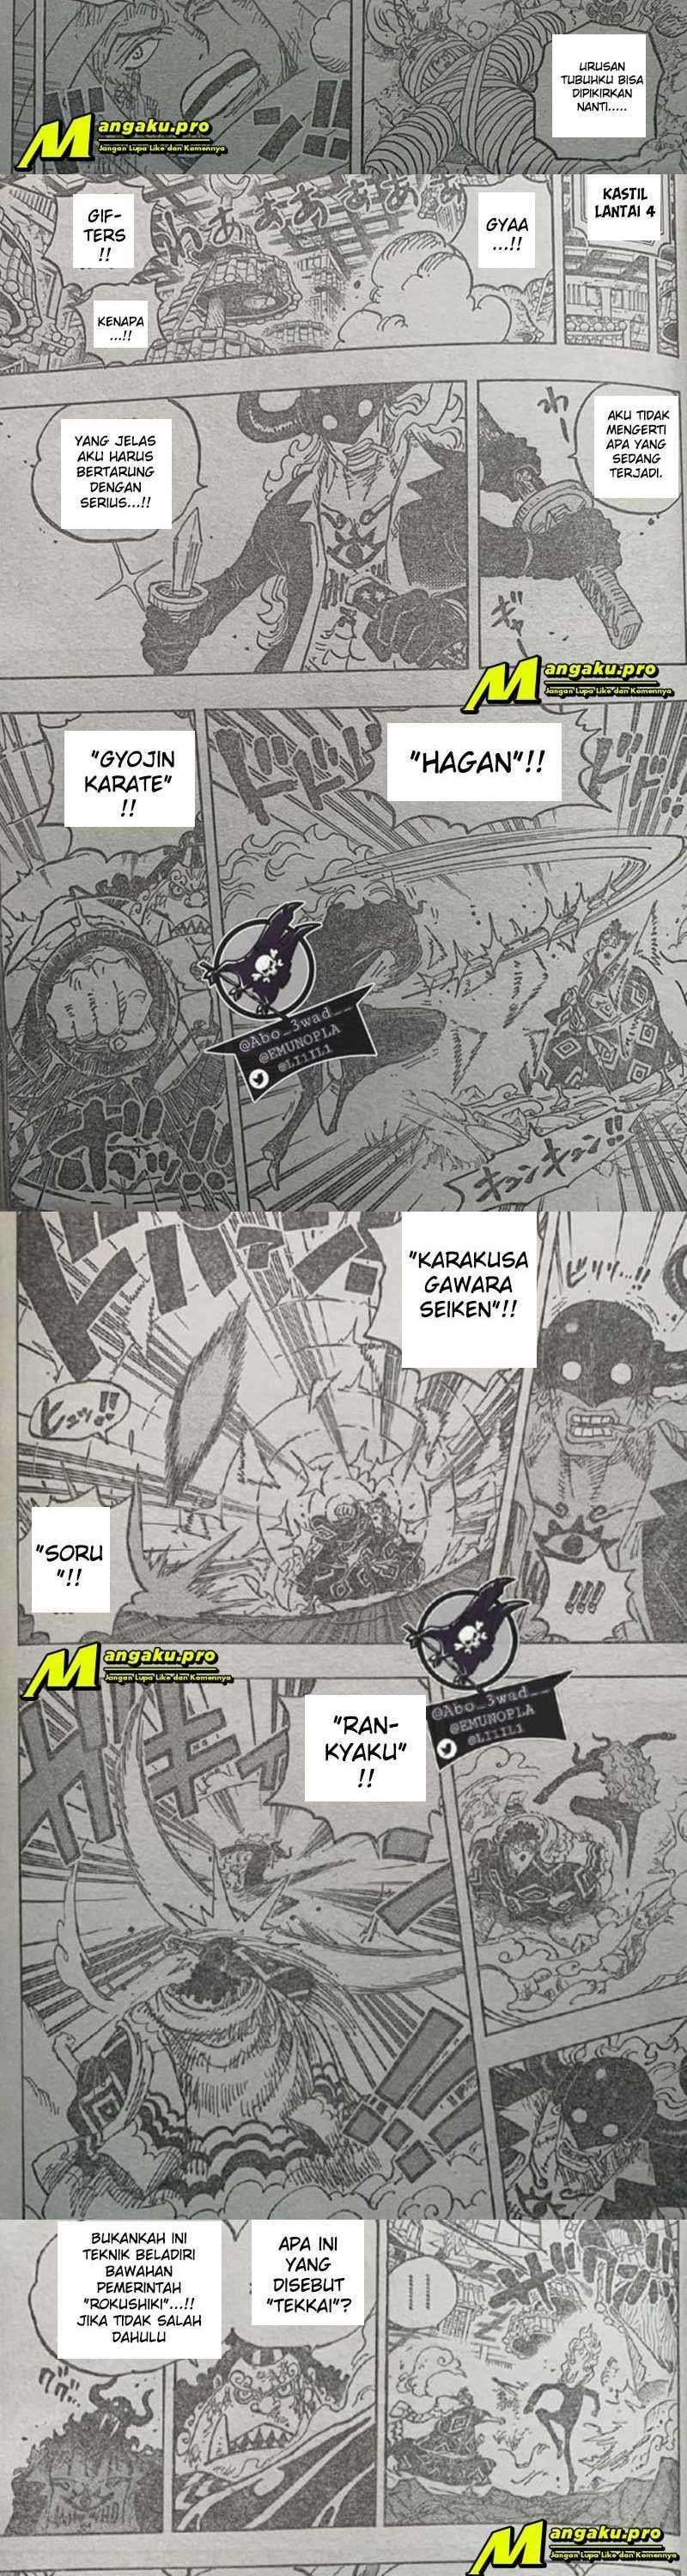 One Piece Chapter 1017 Lq - 59